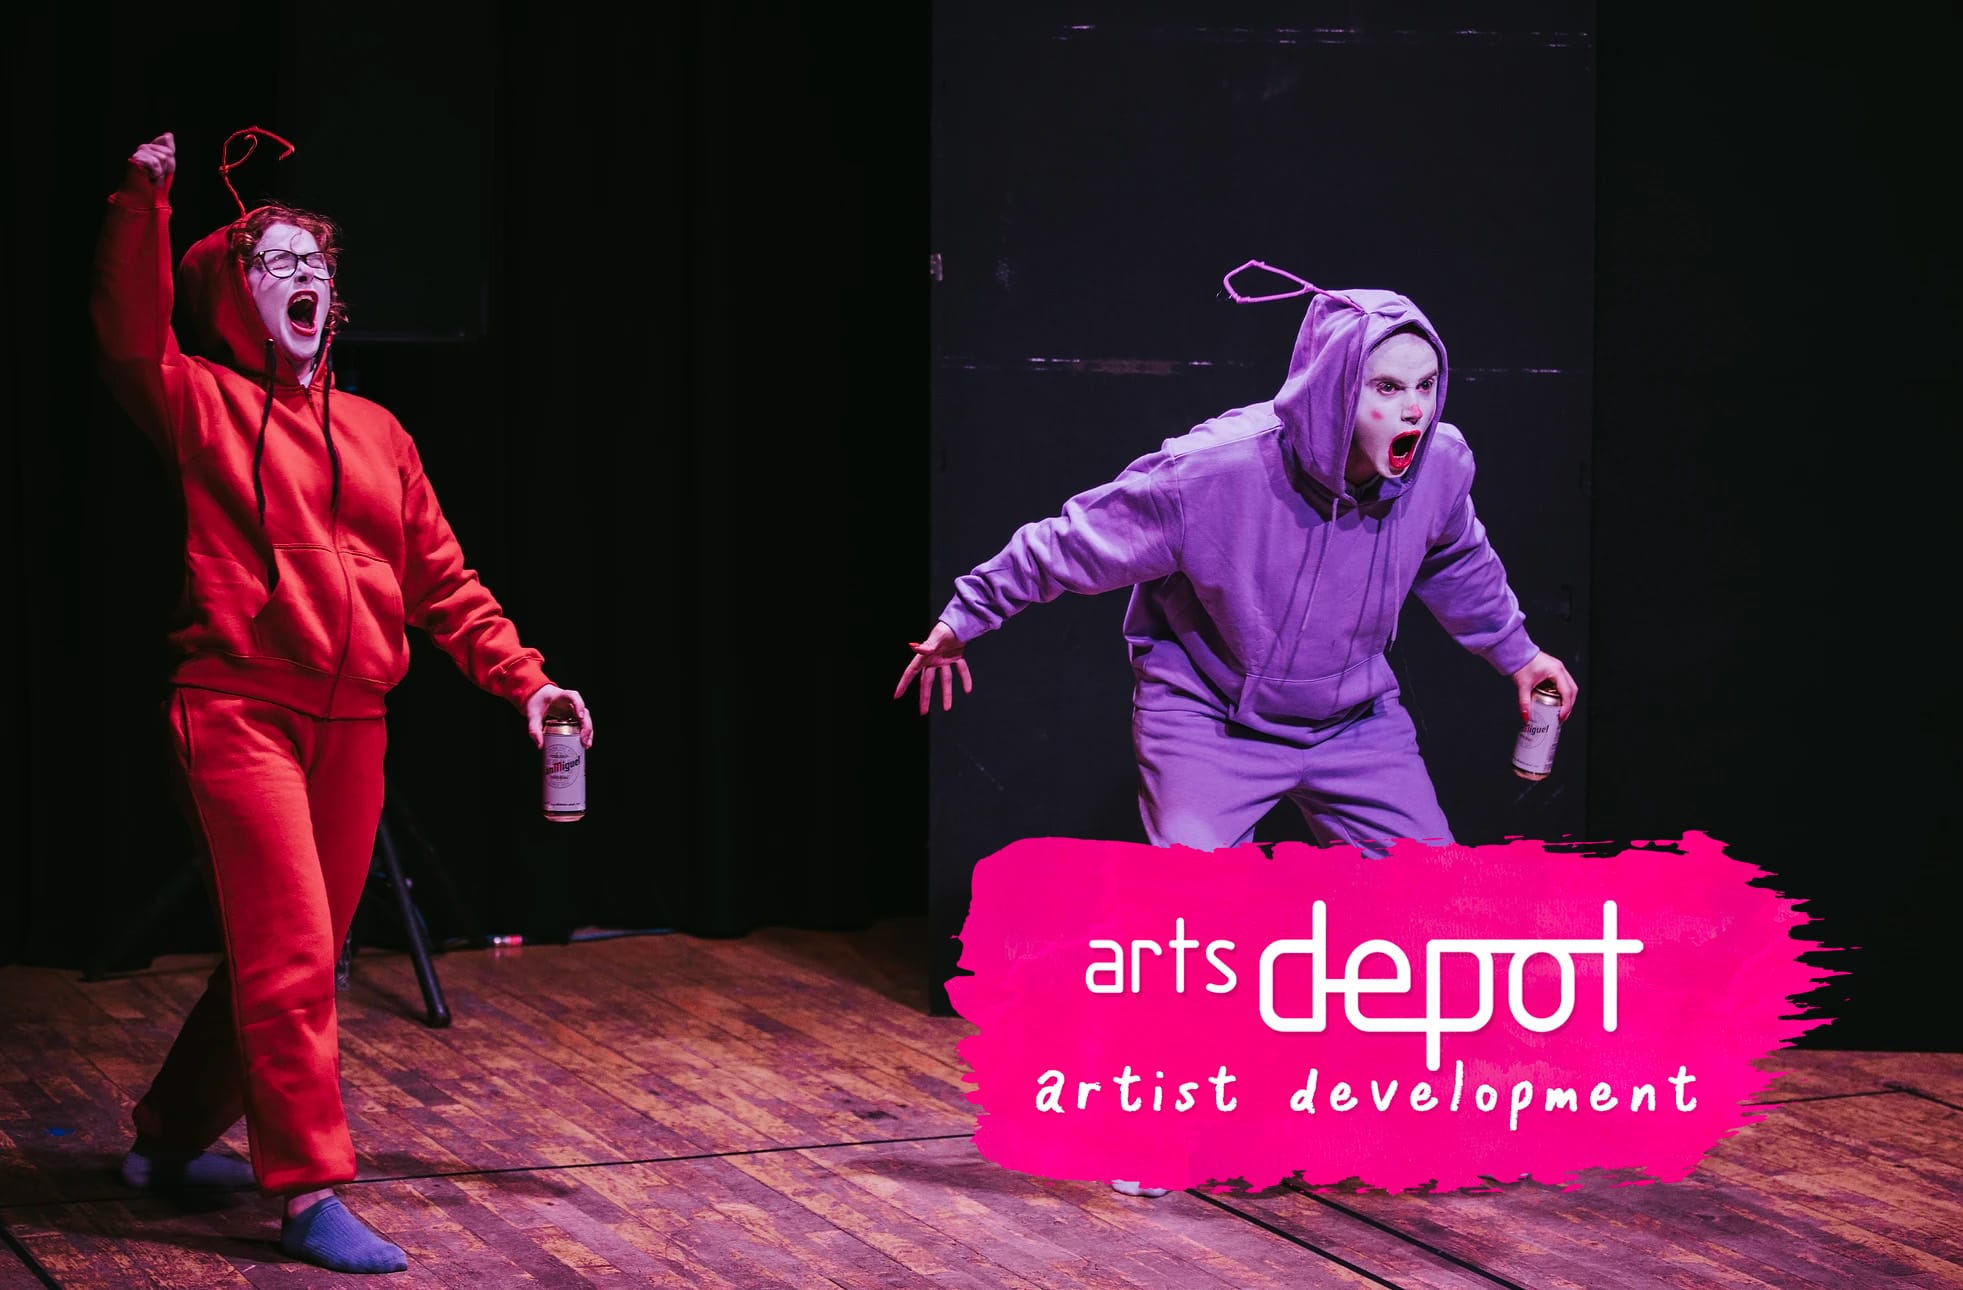 Two performers are dressed as alternative teletubbies in colourful tracksuits, with drag and clown inspired make-up. They are posing with dynamic expressions. In the bottom right-hand corner, a pink paint stroke logo reads 'artsdepot artist development'.